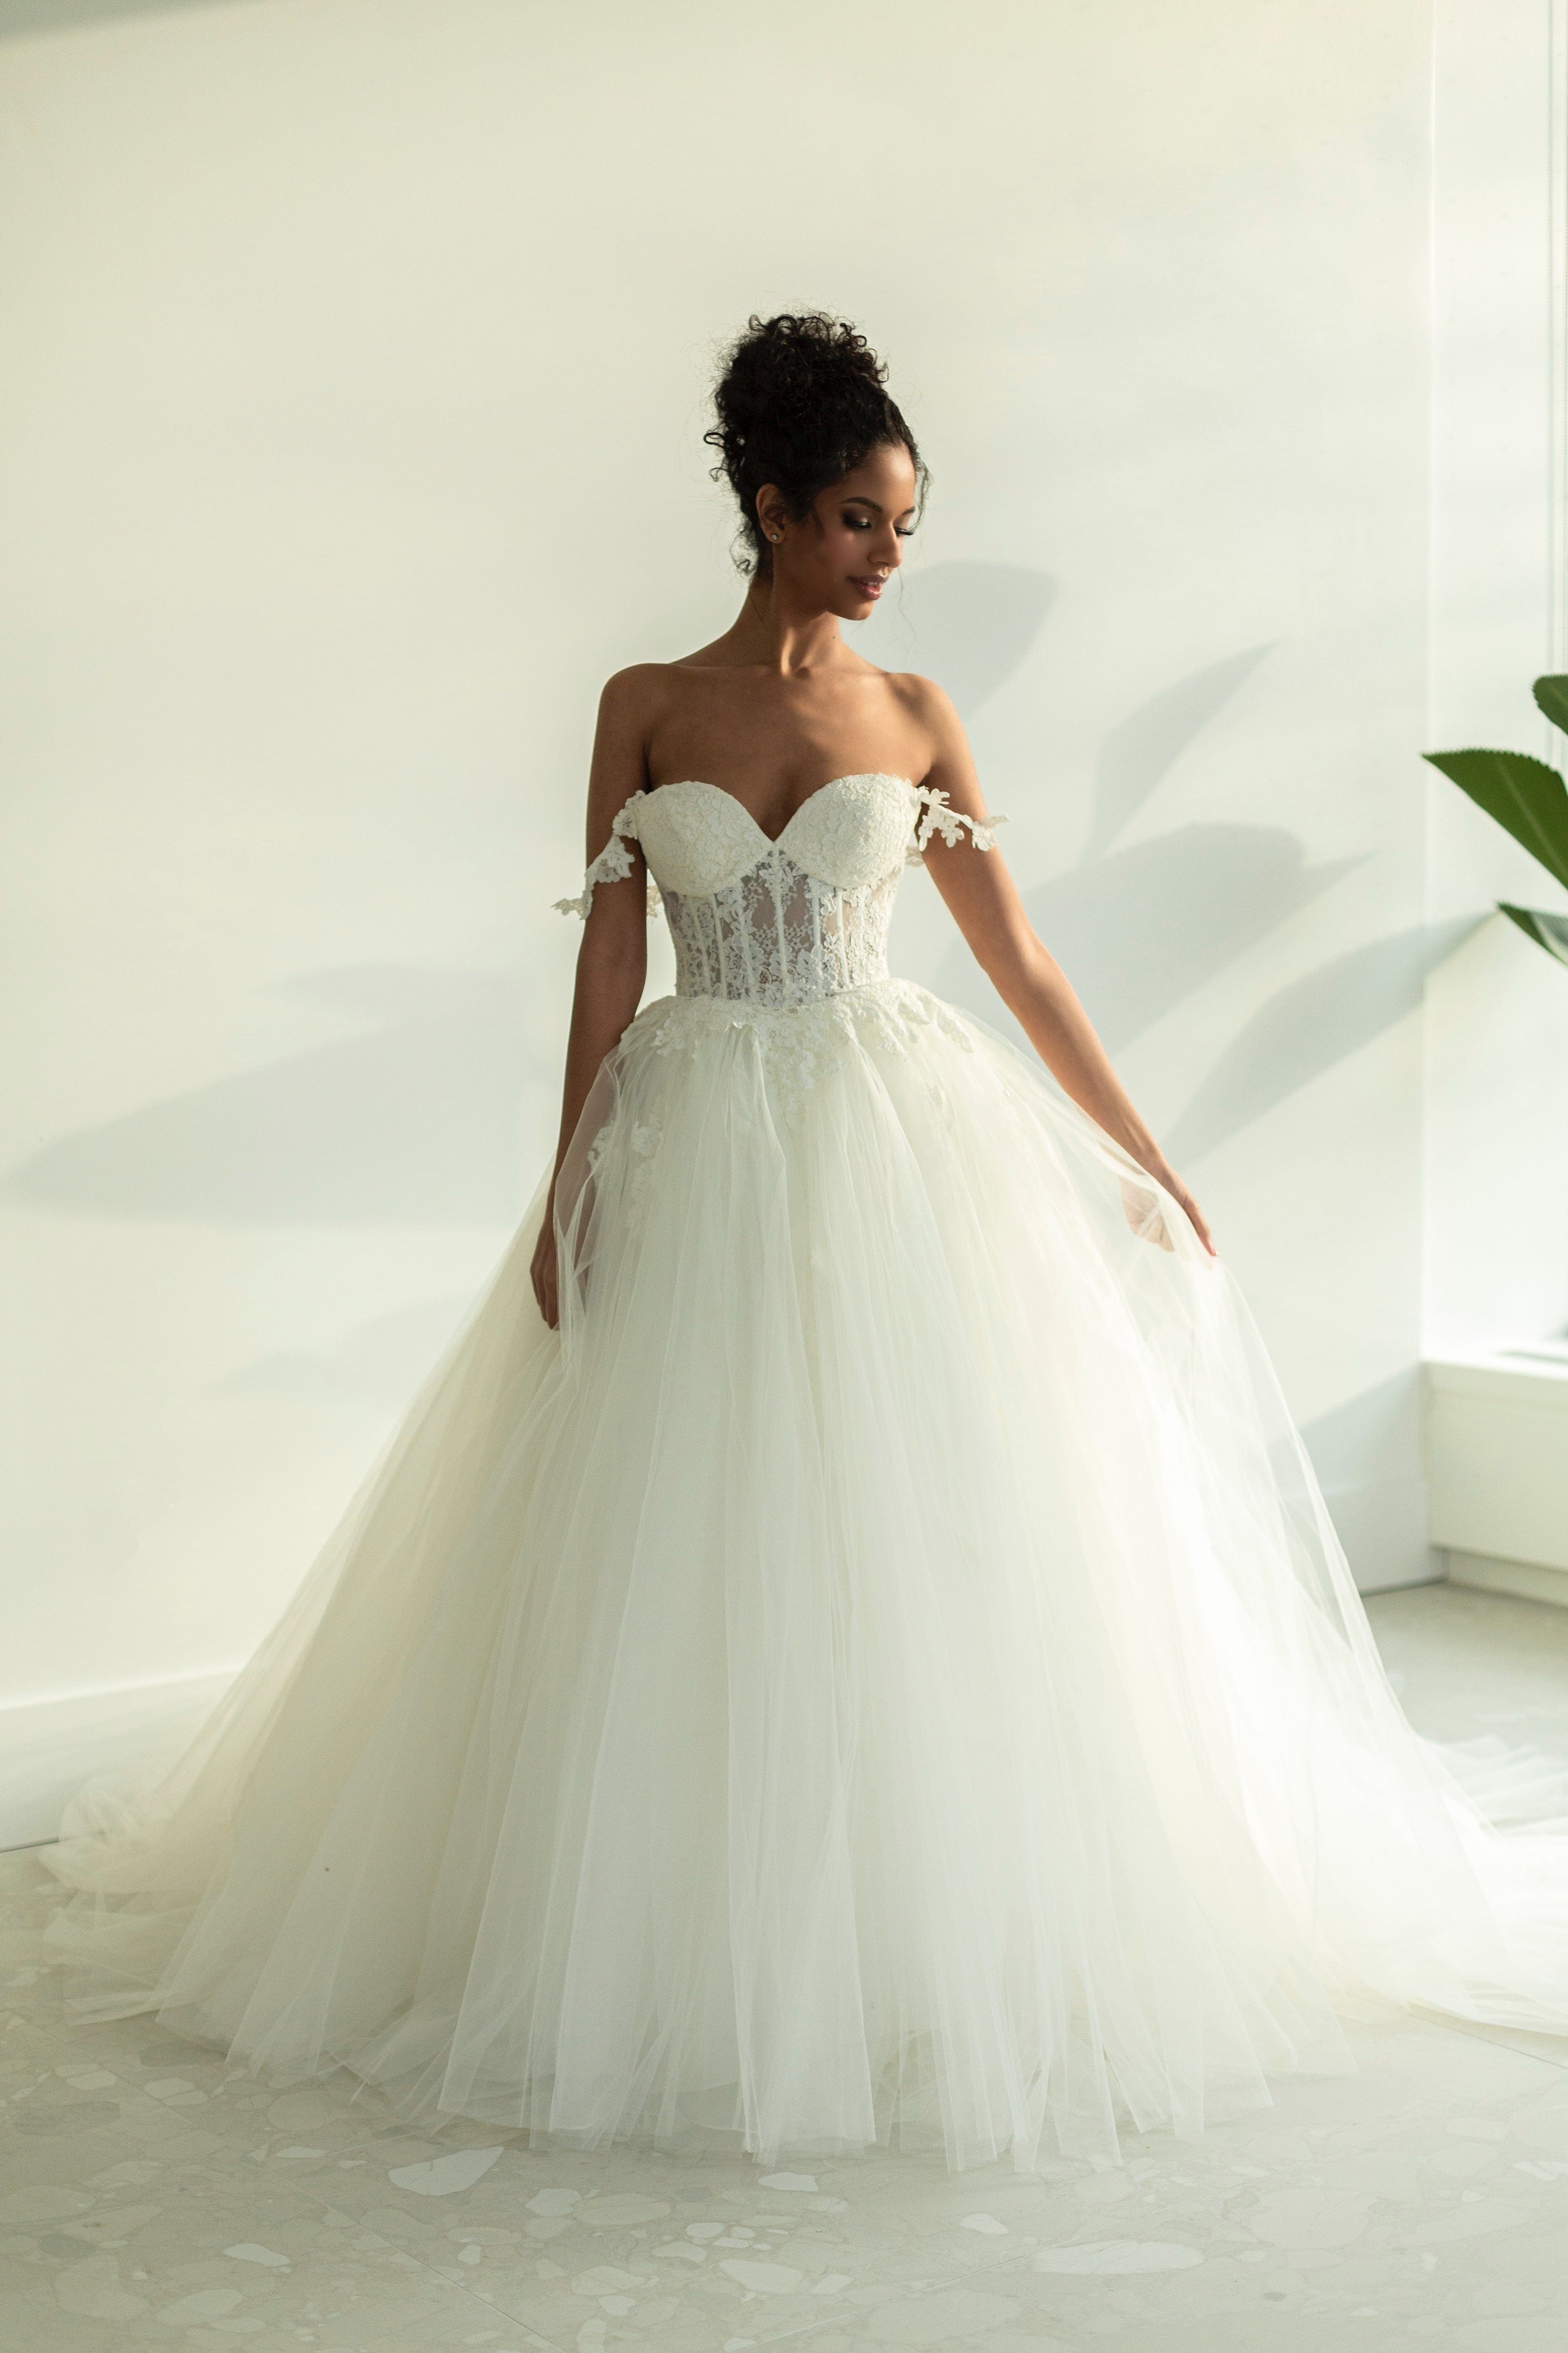 Haute Couture Dresses For Sale Crystal High Neck Wedding Dress